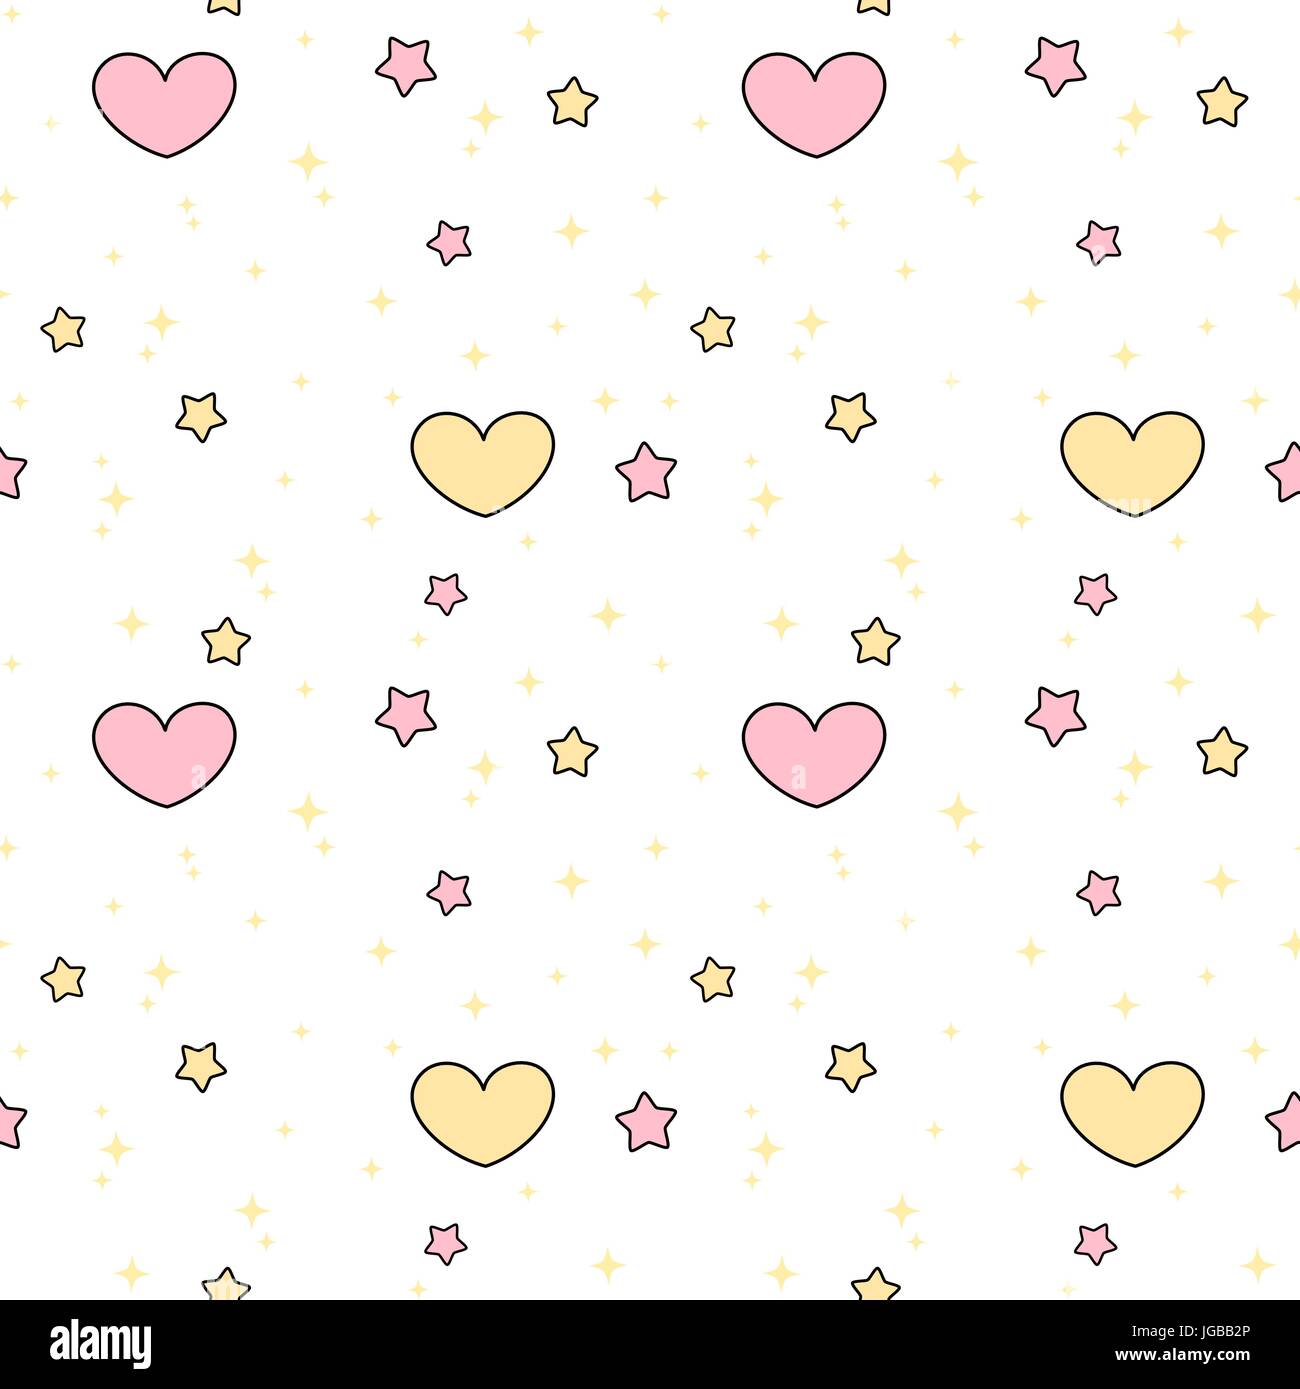 Seamless pattern of cute love hearts in cartoon style in bright